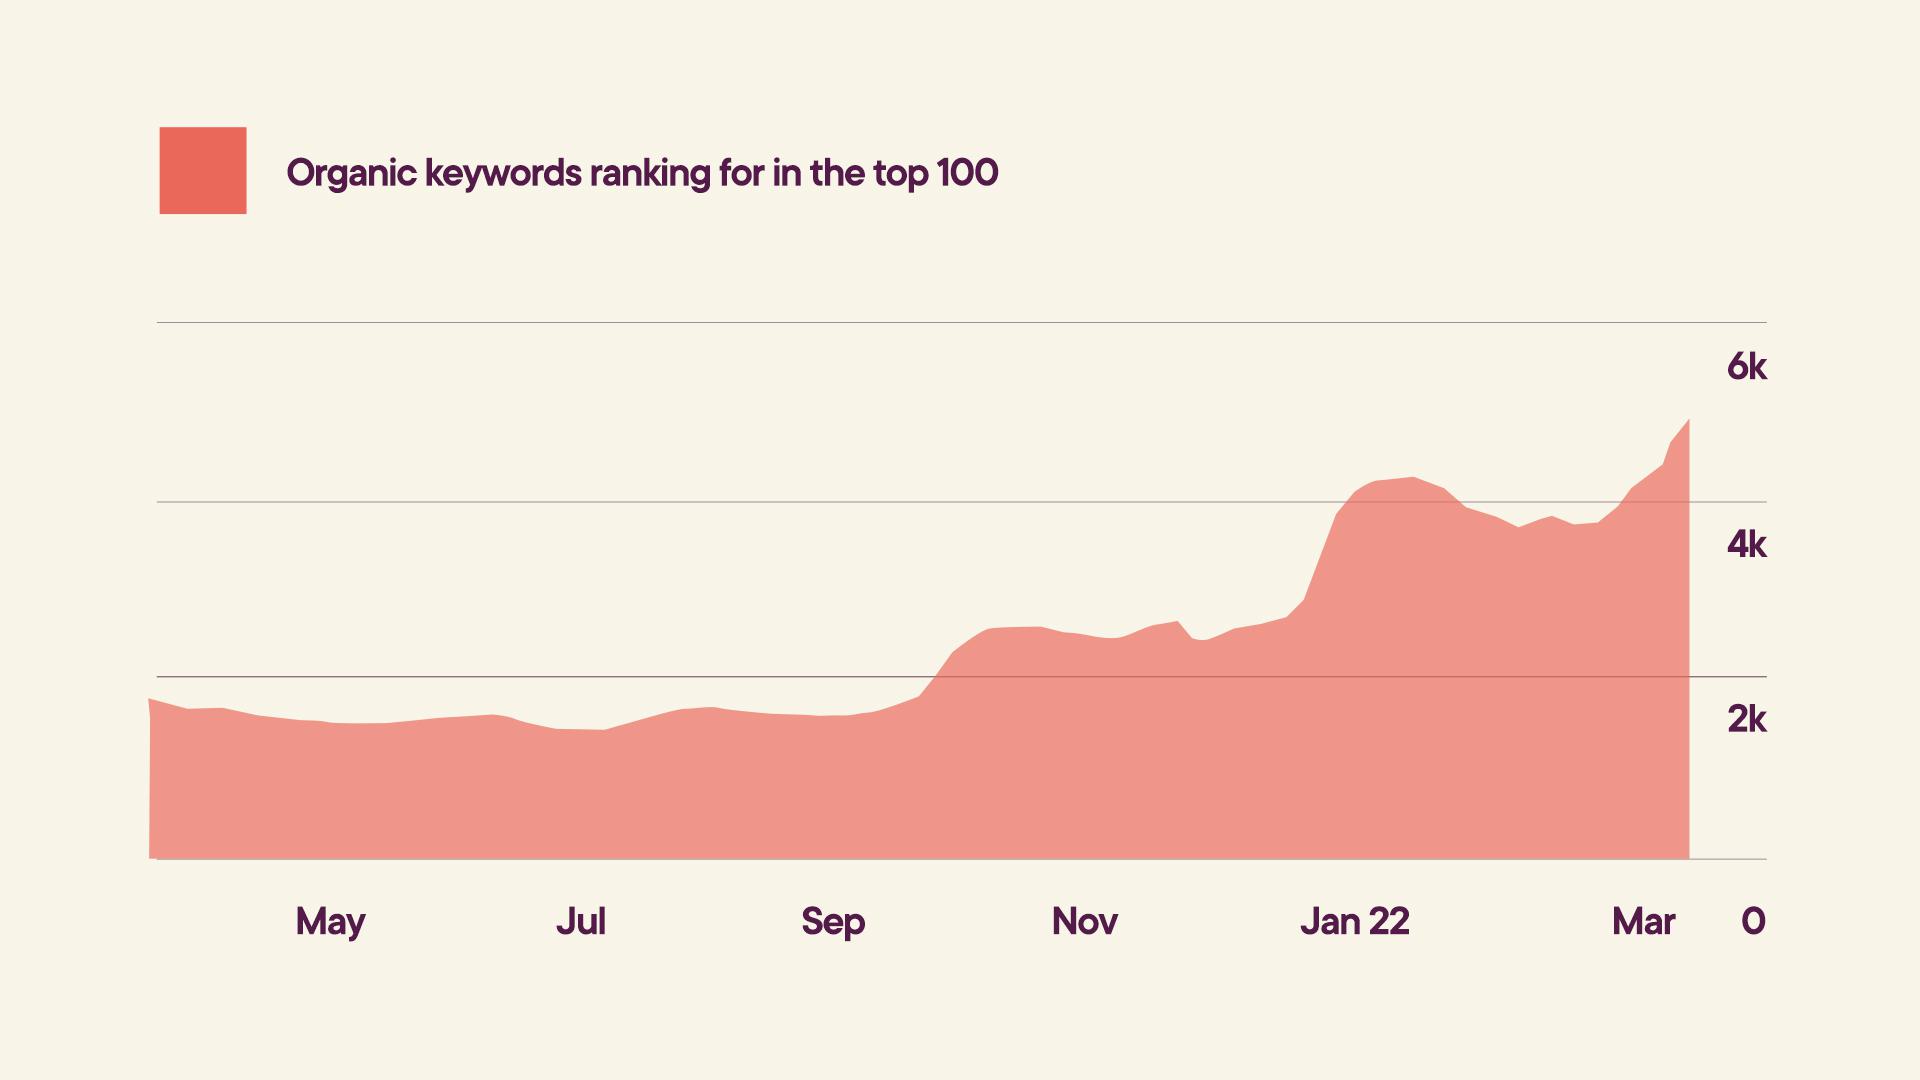 Organic keywords ranking for in the top 100